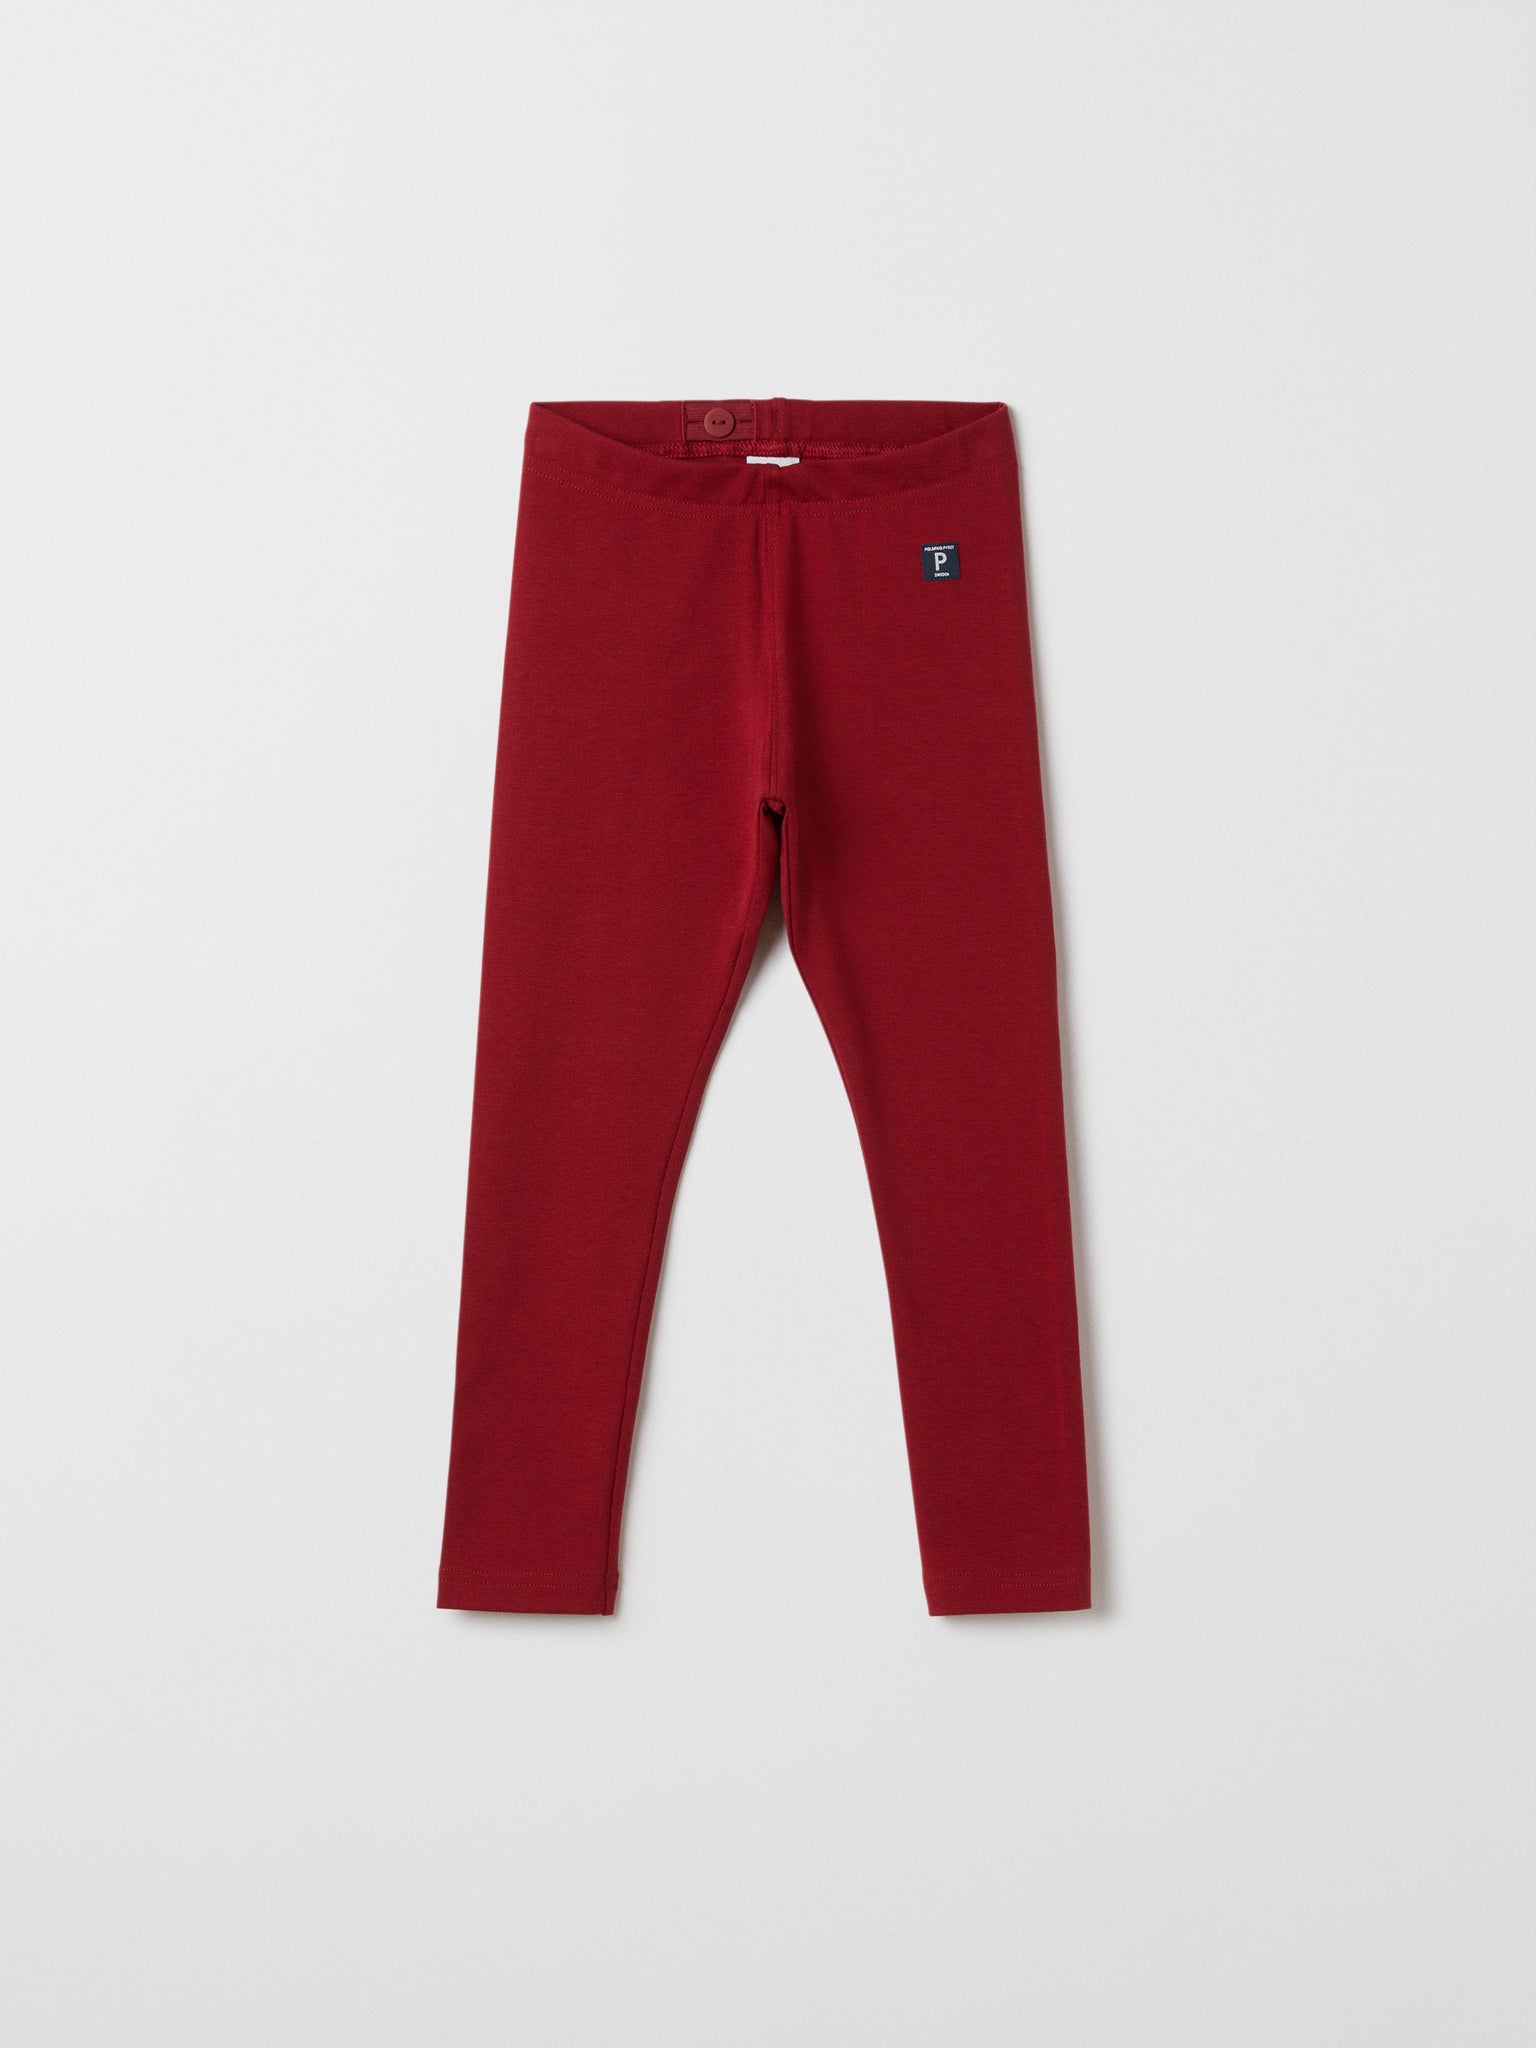 Red Organic Cotton Kids Leggings from the Polarn O. Pyret kidswear collection. Ethically produced kids clothing.